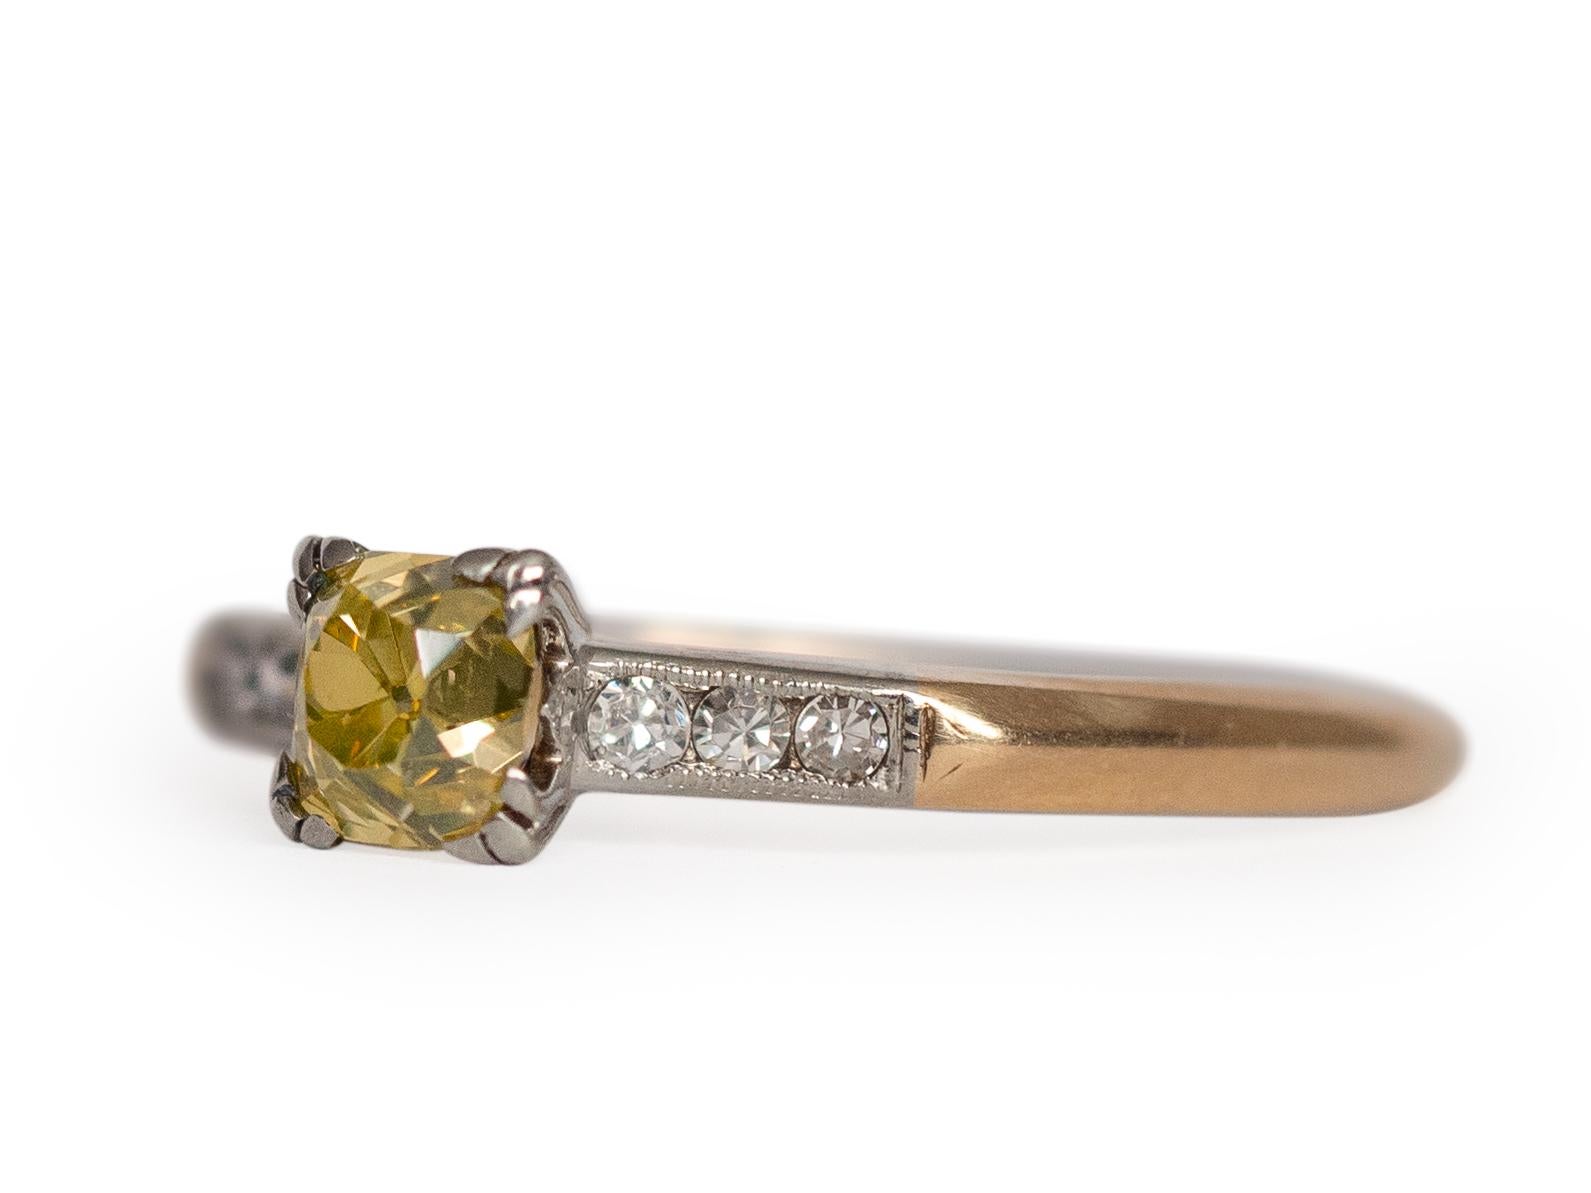 Item Details: 
Ring Size: 6
Metal Type: 14 Karat Yellow Gold & Platinum Prongs [Hallmarked, and Tested]
Weight: 2.8 grams

Center Diamond Details:
GIA REPORT #: 6pm 177207640
Weight: .63
Cut: Old European brilliant
Color: Fancy Intense Yellow